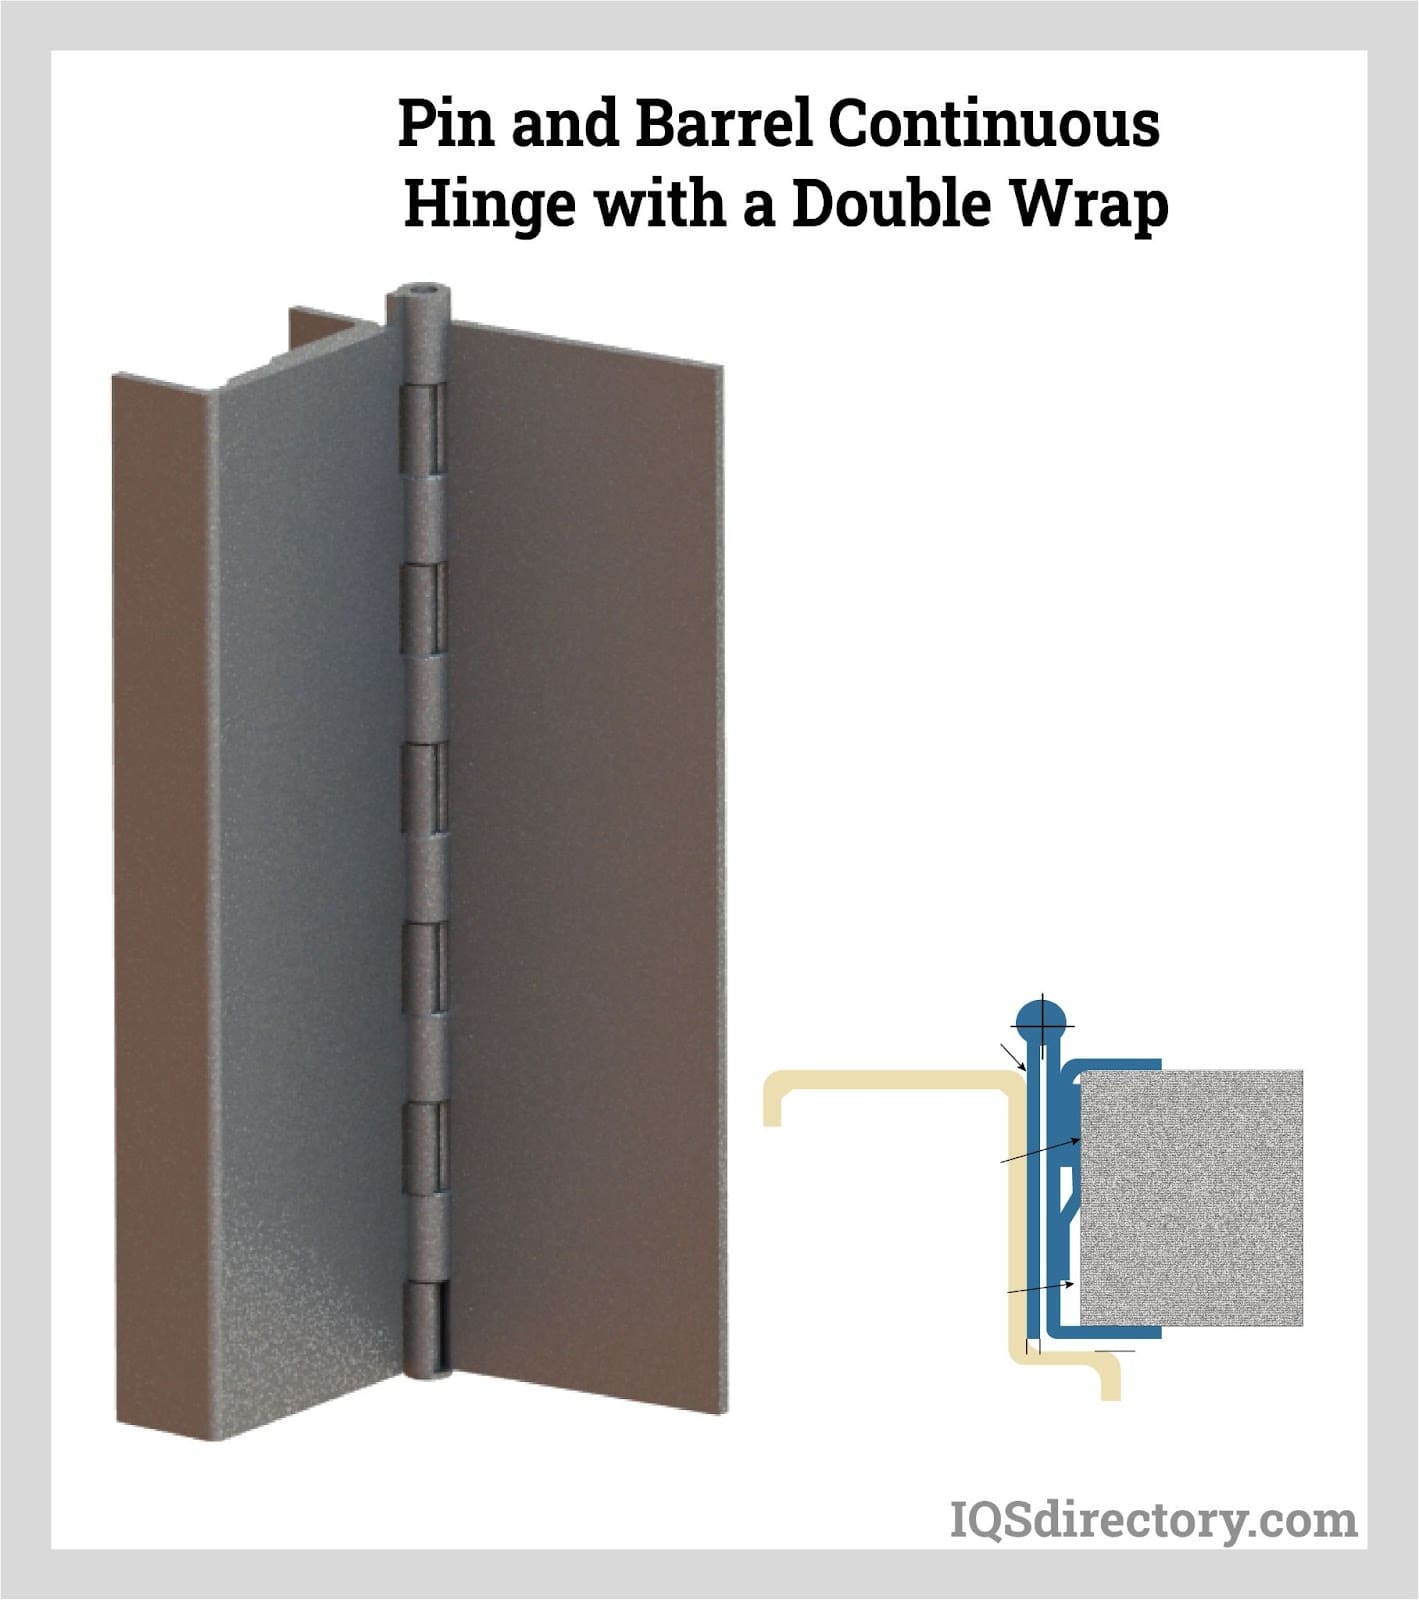 Pin and Barrel Continuous Hinge with a Double Wrap